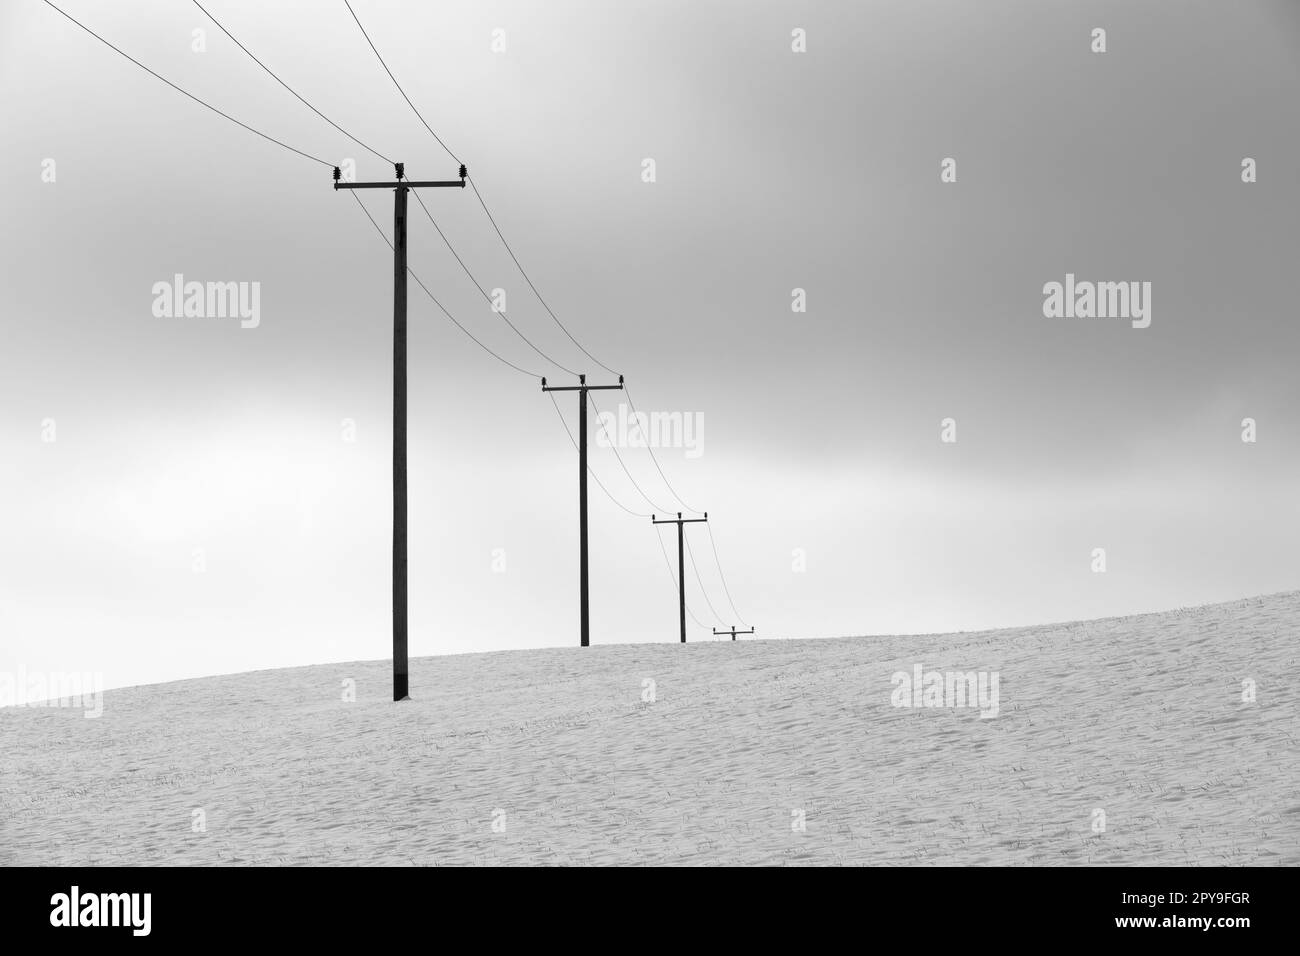 Electrical towers in winter landscape Stock Photo